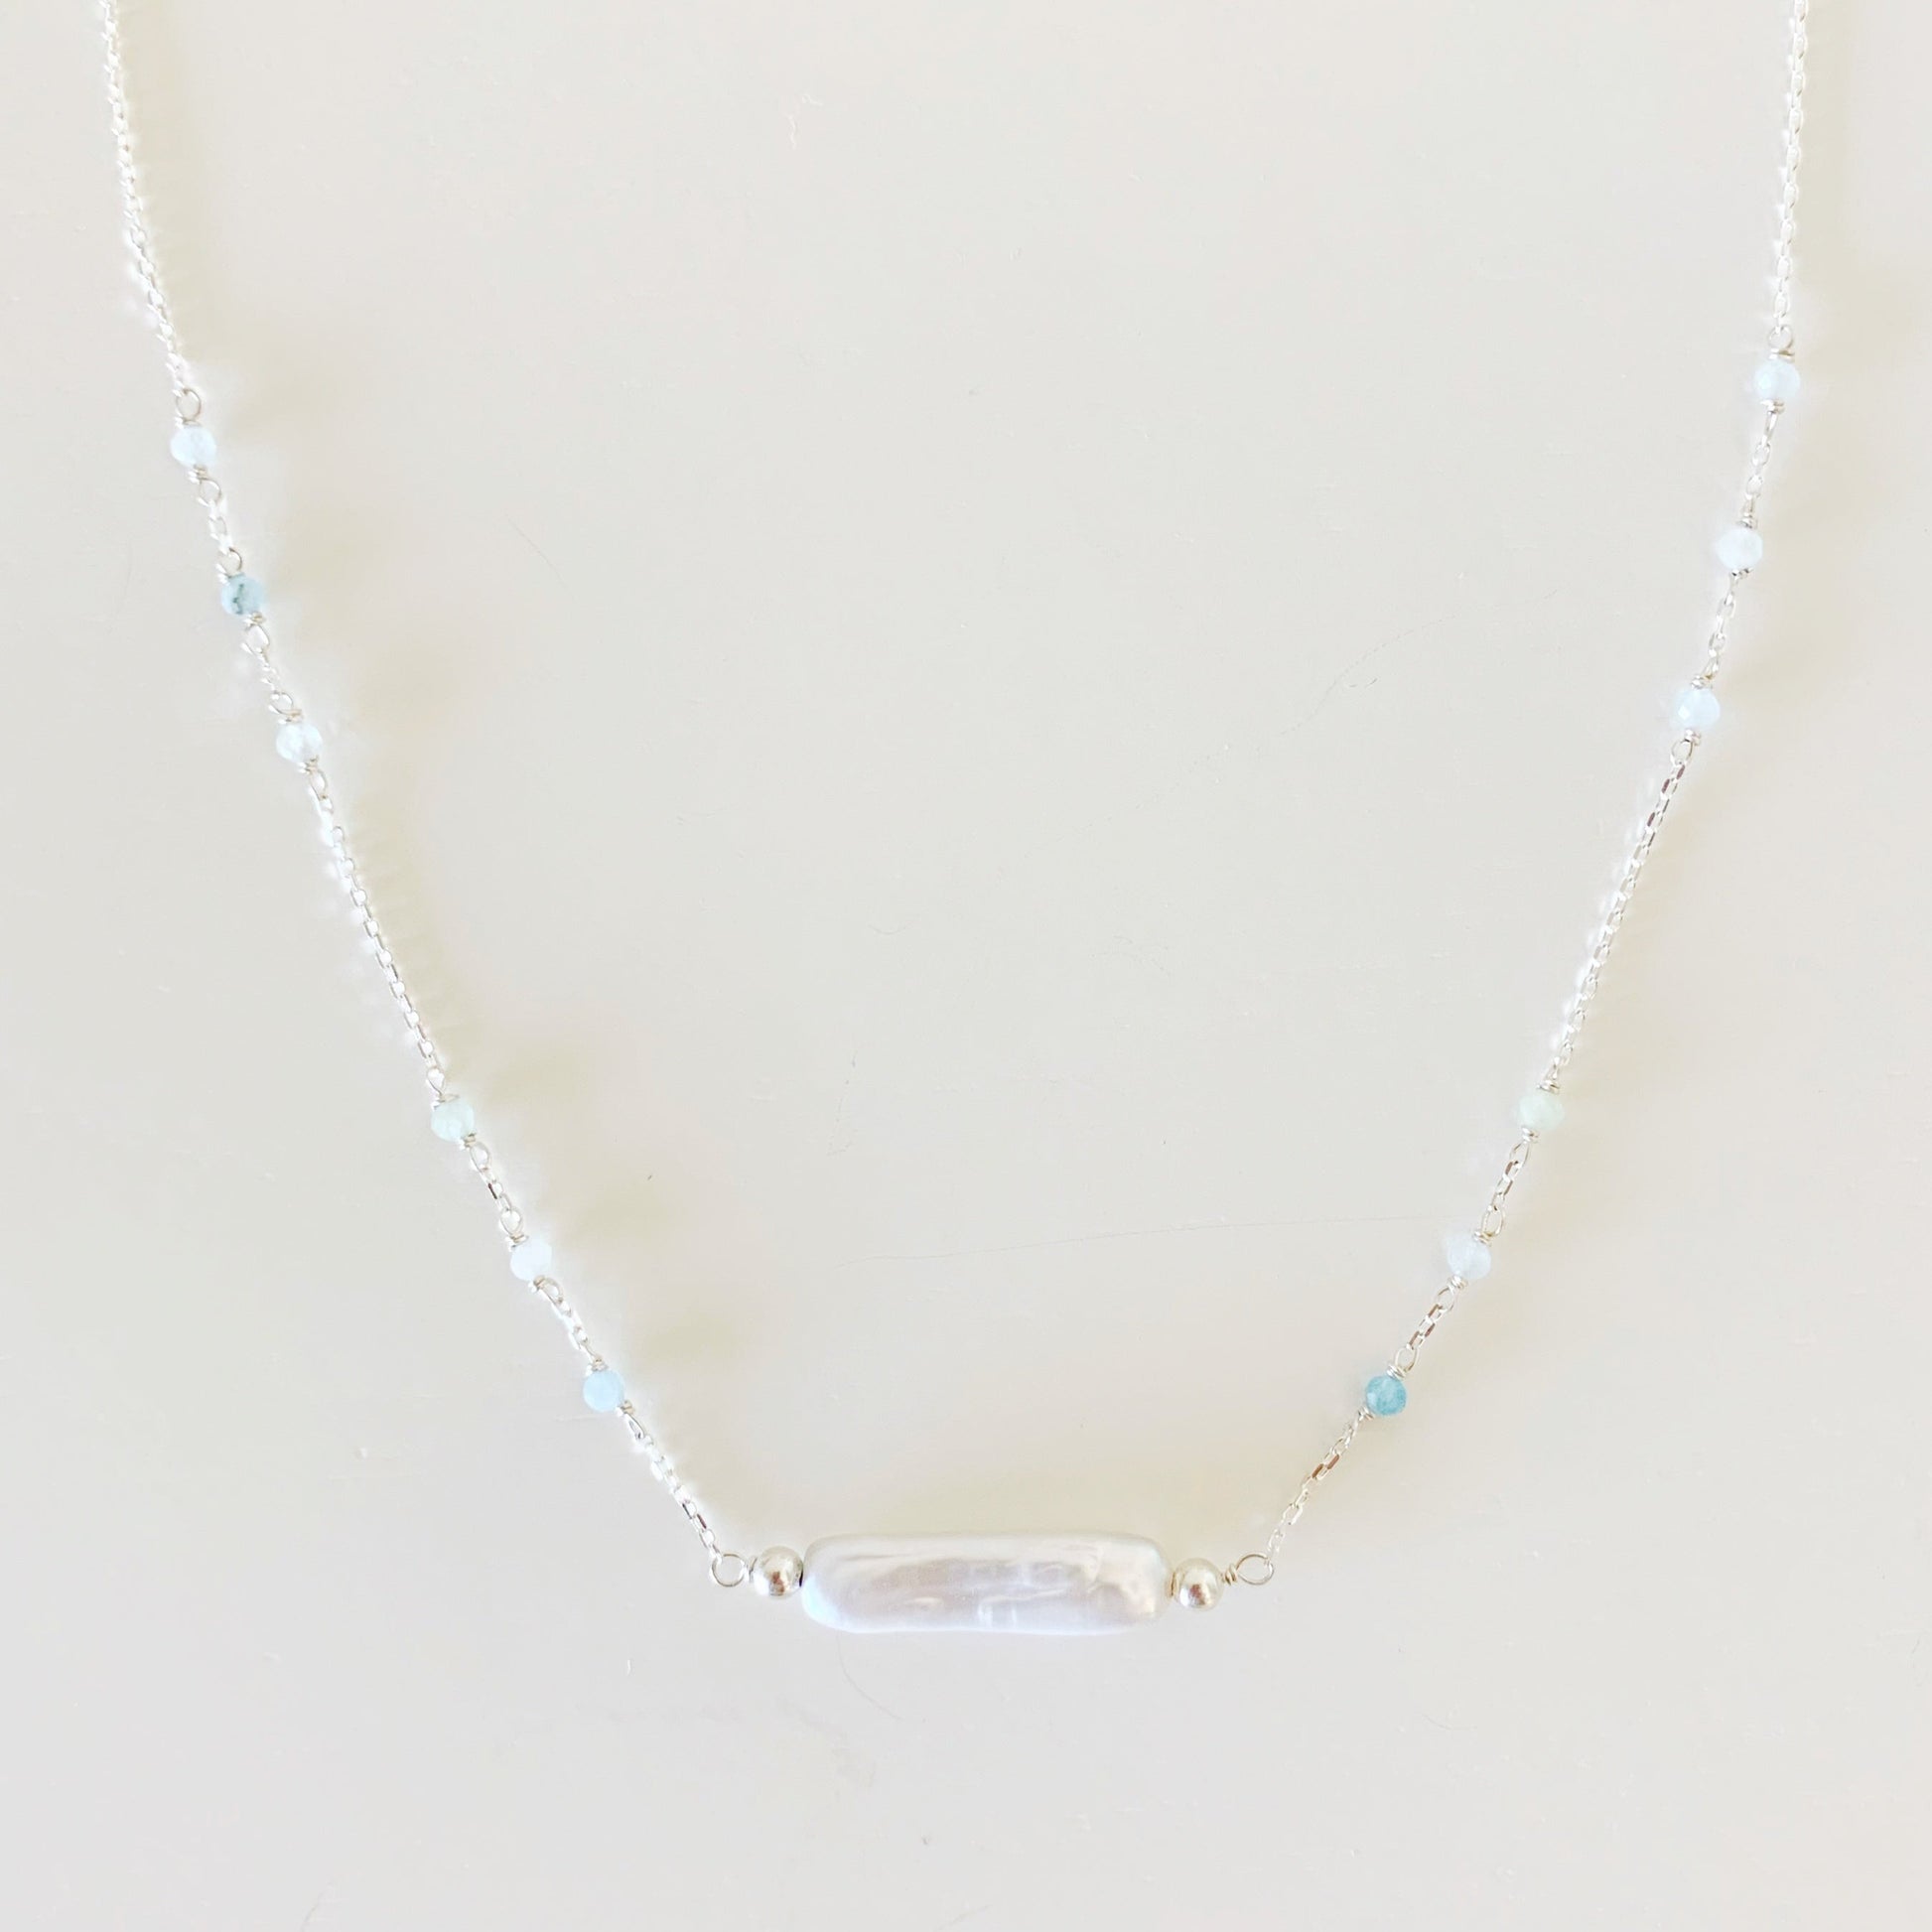 the truro necklace by mermaids and madeleines is created with sterling silver chain dotted with microfaceted aquamarine gems and has a freshwater stick pearl at the center. this is a closer up view of the necklace and photographed on a white surface